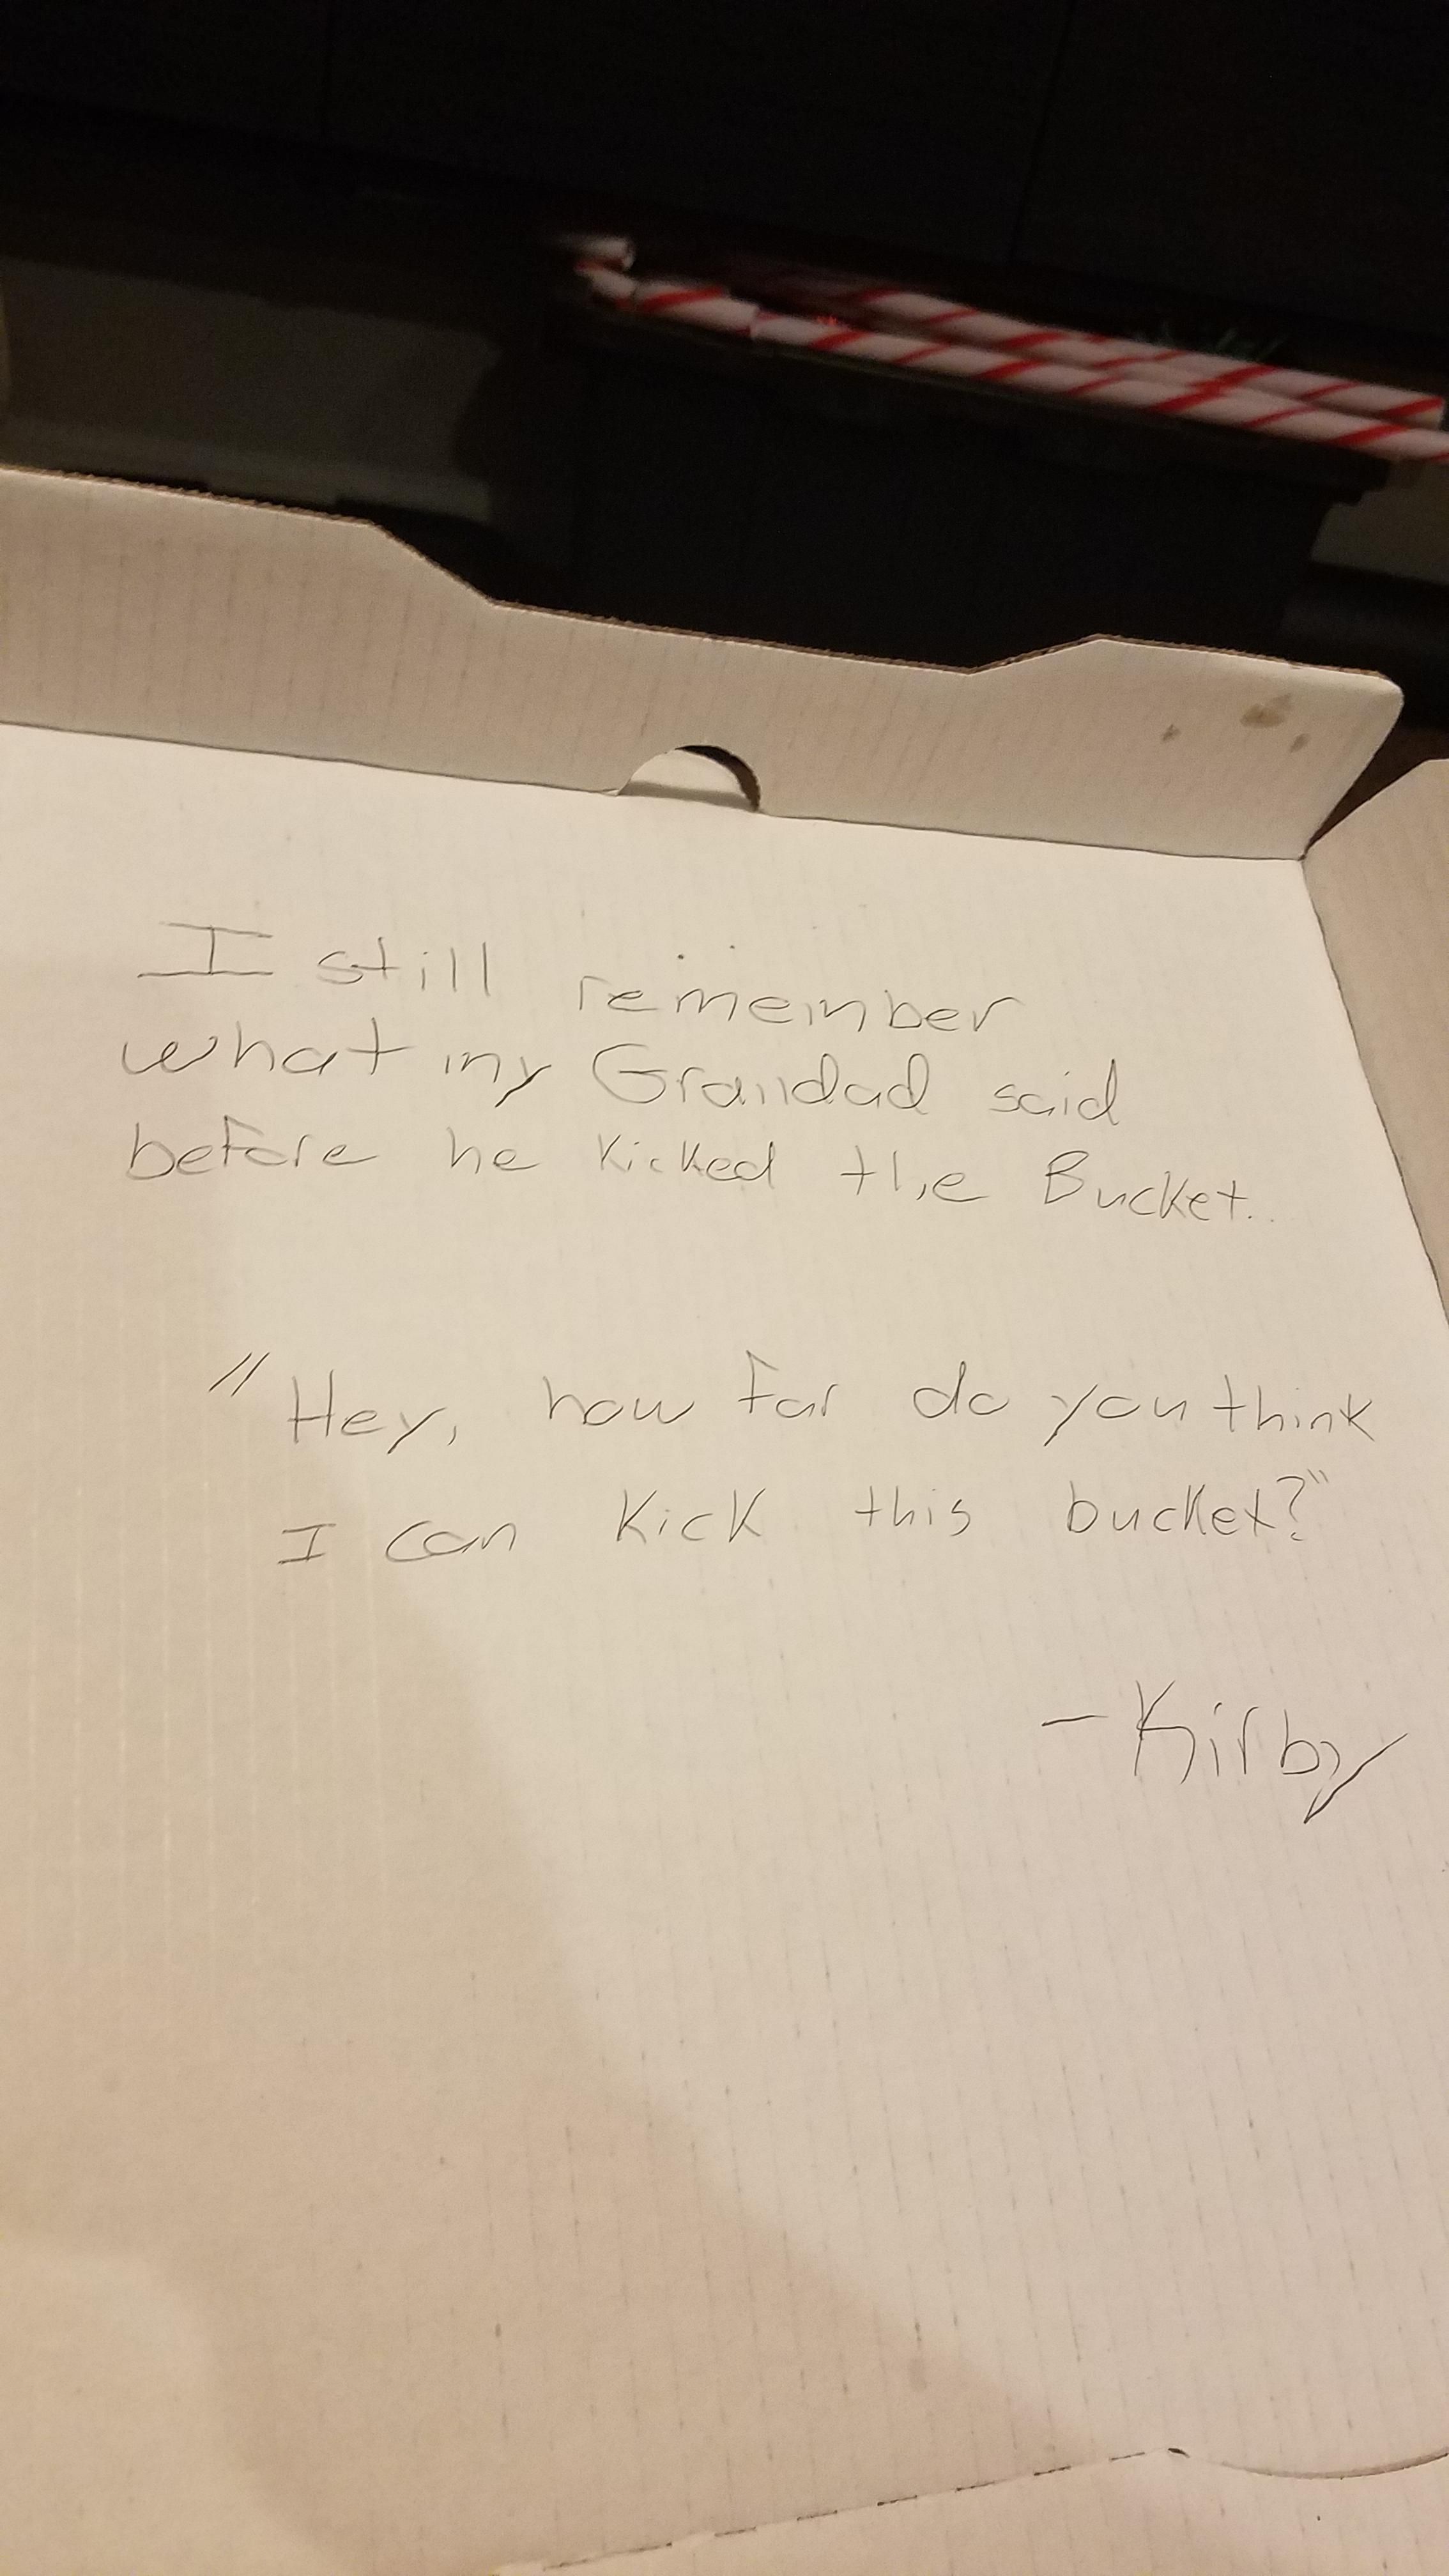 So I asked the pizza guy to write a dad joke in the Box